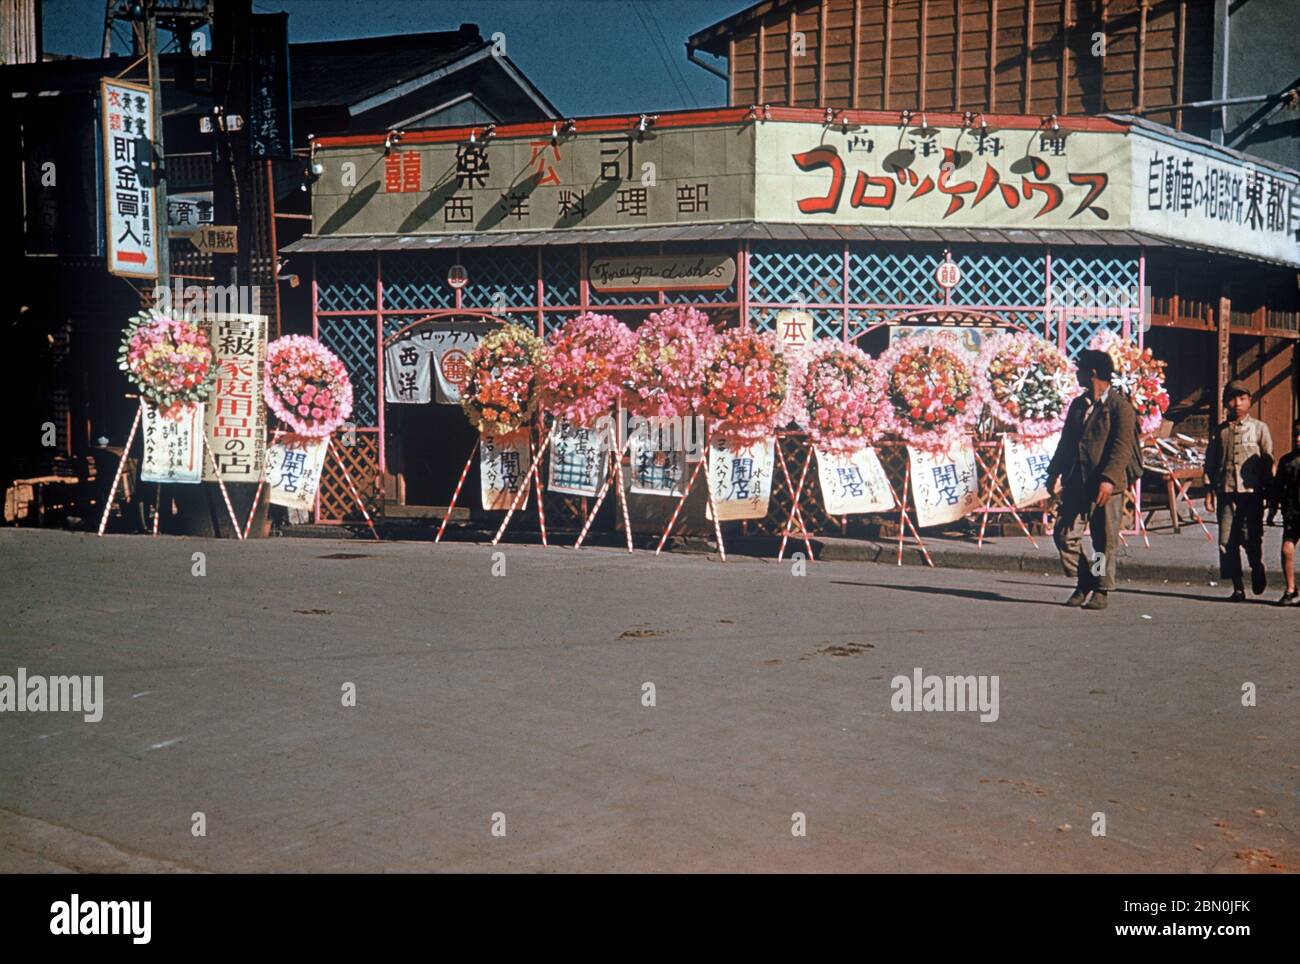 [ 1950s Japan - Celebrating the Opening of a New Restaurant ] —   Colorful wreaths celebrating the opening of a new restaurant (開店祝いの花輪), 1950s.  The restaurant is called called Croquette House (コロッケハウス) and offers Western style food.  20th century vintage slide film. Stock Photo